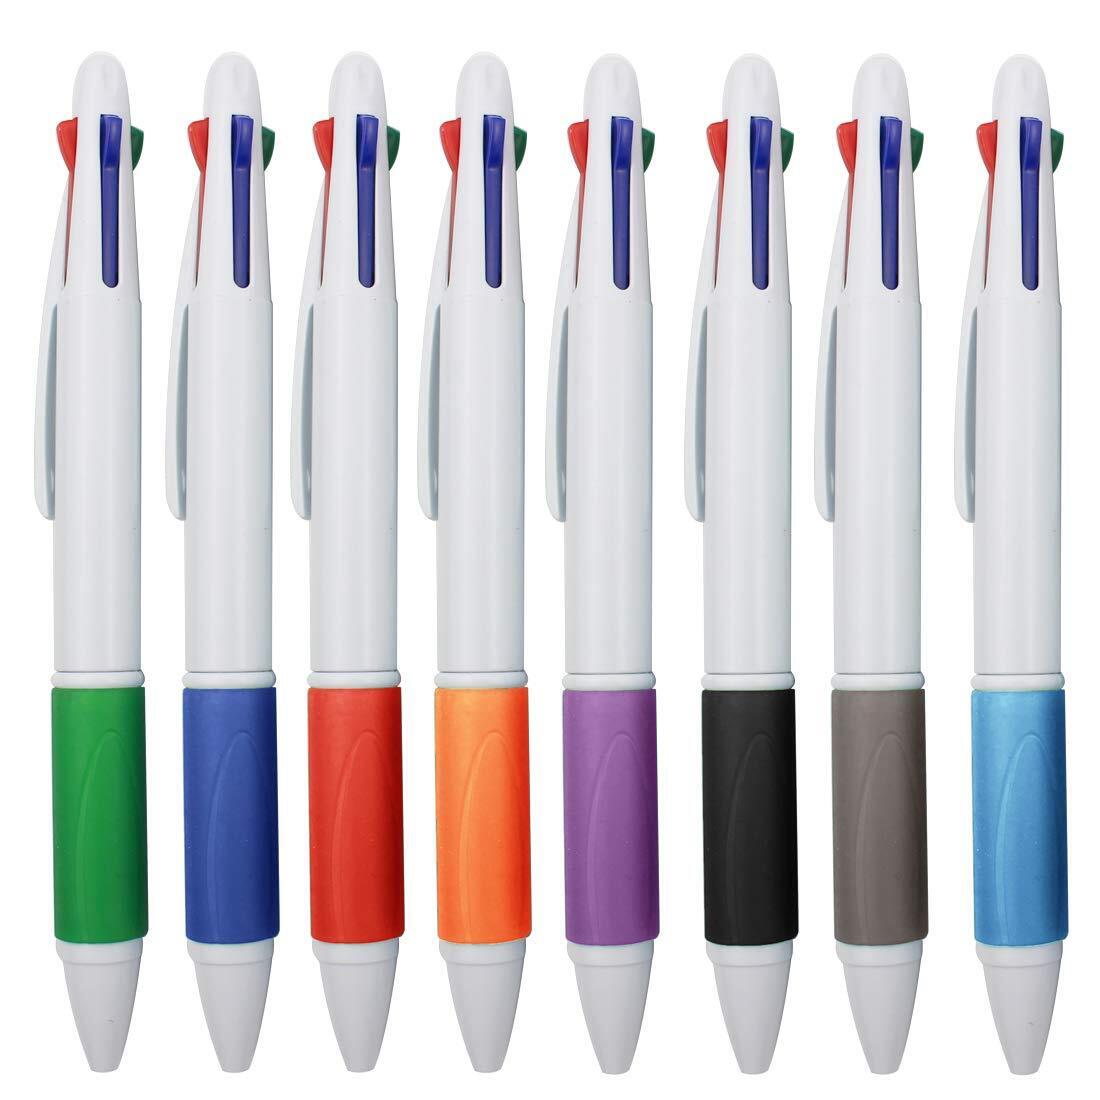 Multicolored Pens in One 4-Color Ballpoint Pen Medium Point (1.0mm), 8-Pack